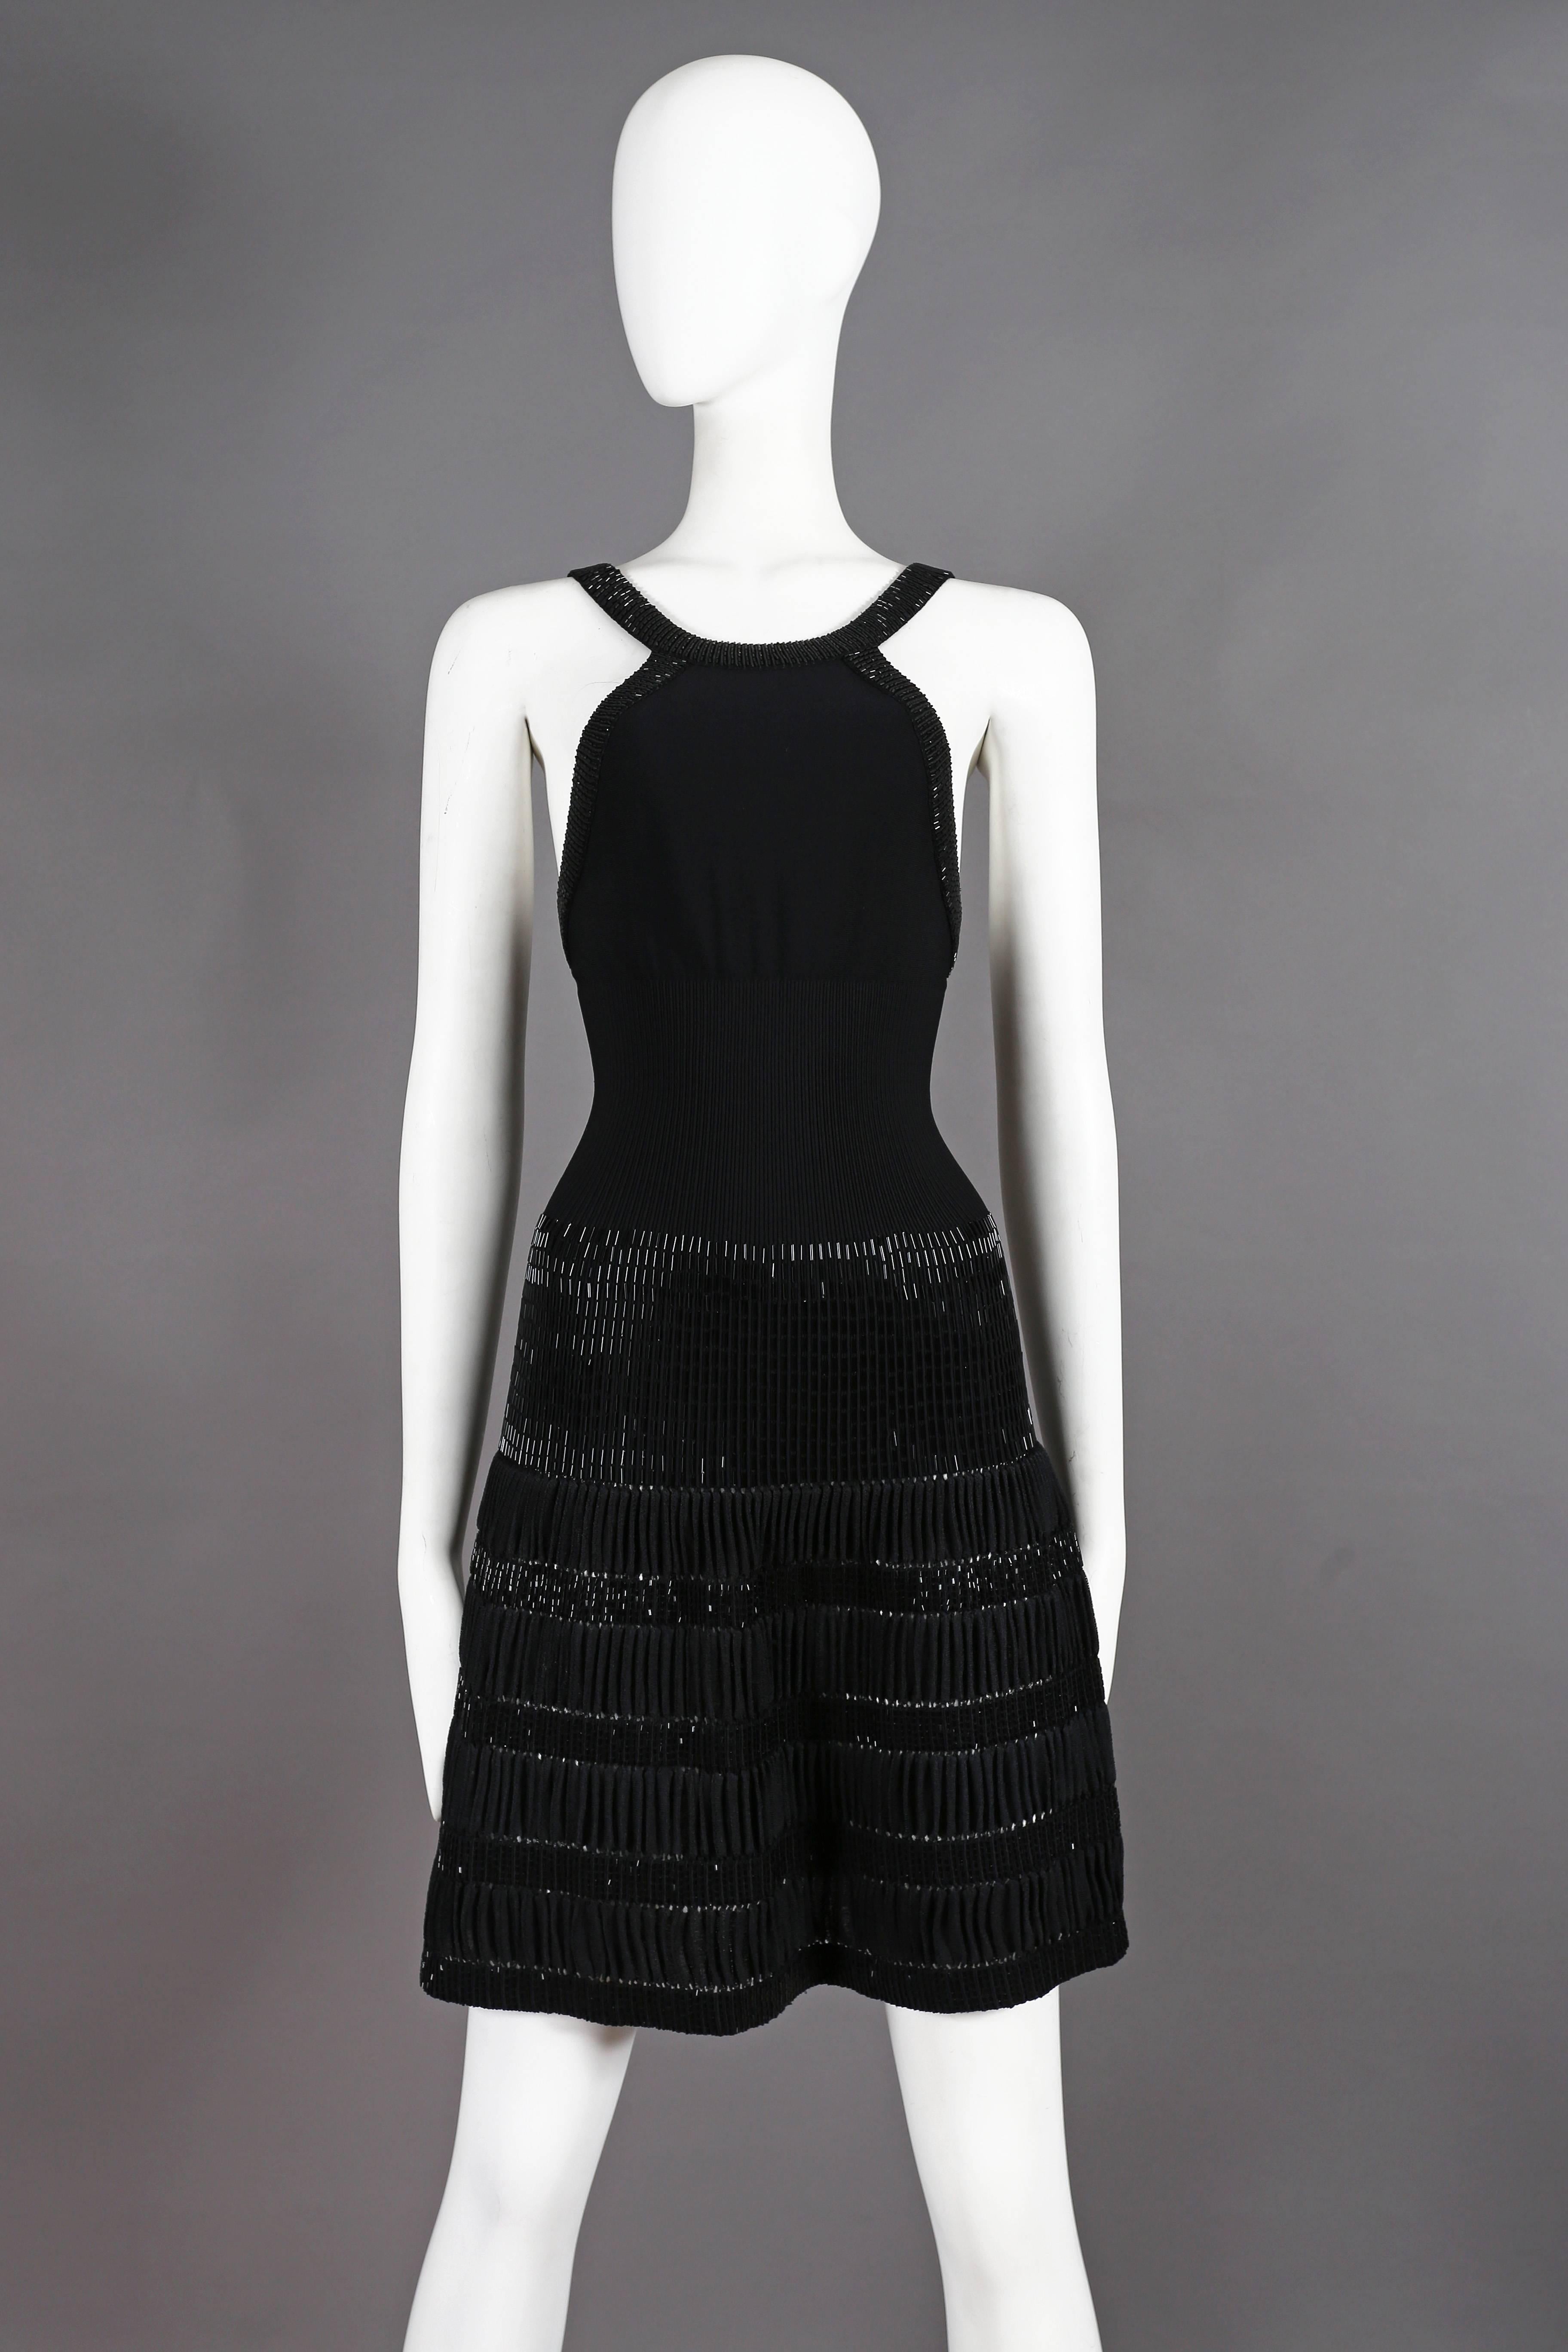 Introducing a striking Azzedine Alaia black evening mini dress, a true masterpiece crafted from a luxurious silk-viscose fabric that hugs the figure flawlessly. This alluring dress showcases unparalleled artistry and attention to detail.

The